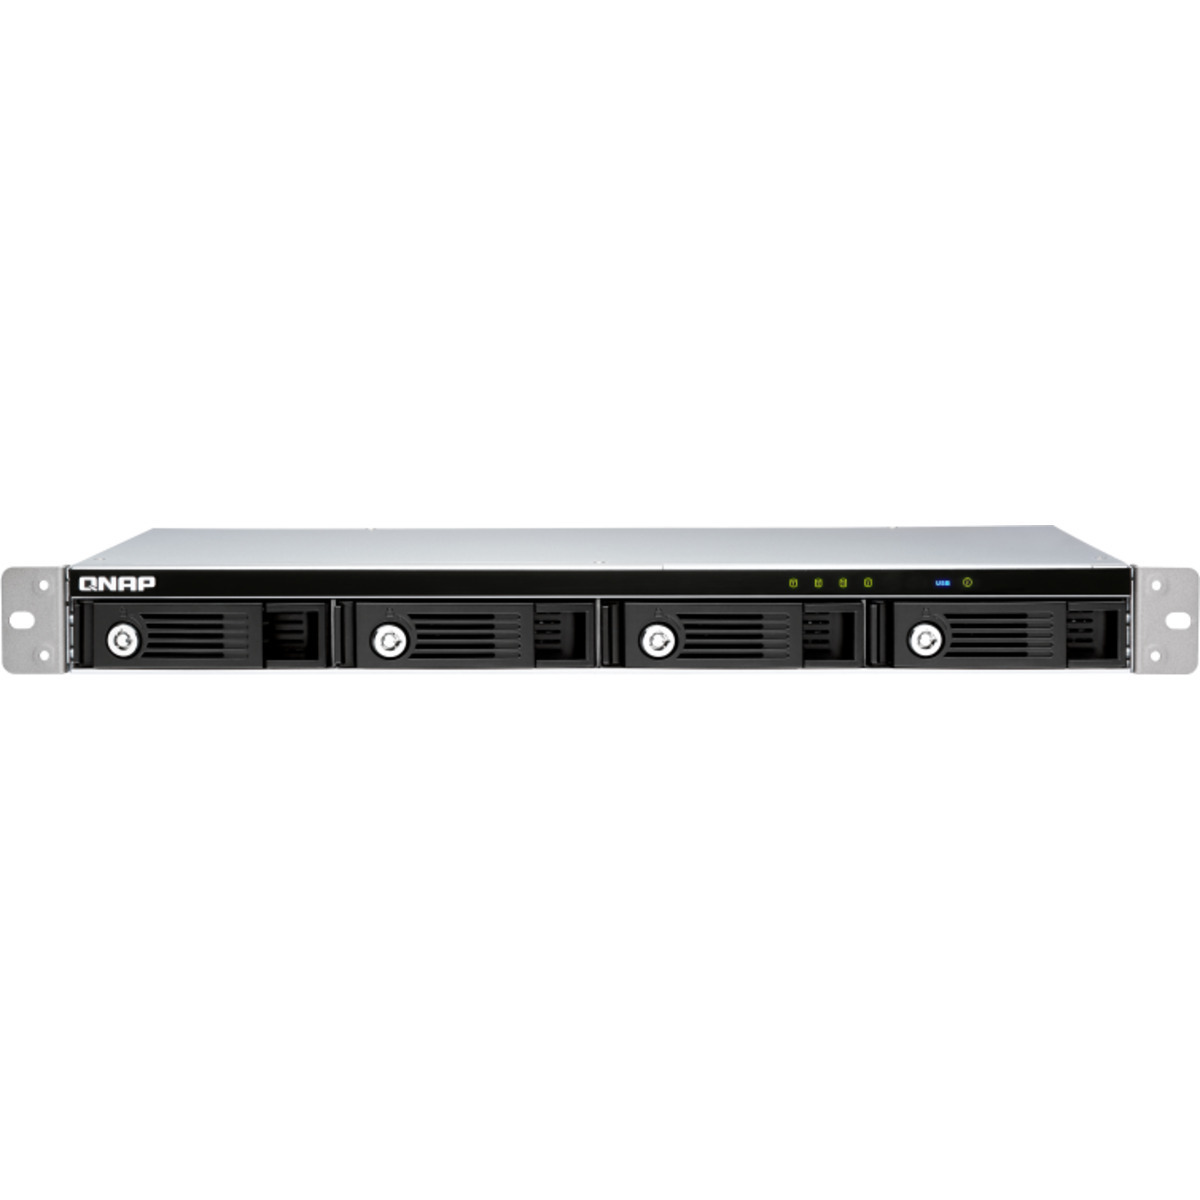 QNAP TR-004U External Expansion Drive 12tb 4-Bay RackMount Multimedia / Power User / Business Expansion Enclosure 3x4tb Seagate IronWolf ST4000VN006 3.5 5400rpm SATA 6Gb/s HDD NAS Class Drives Installed - Burn-In Tested TR-004U External Expansion Drive